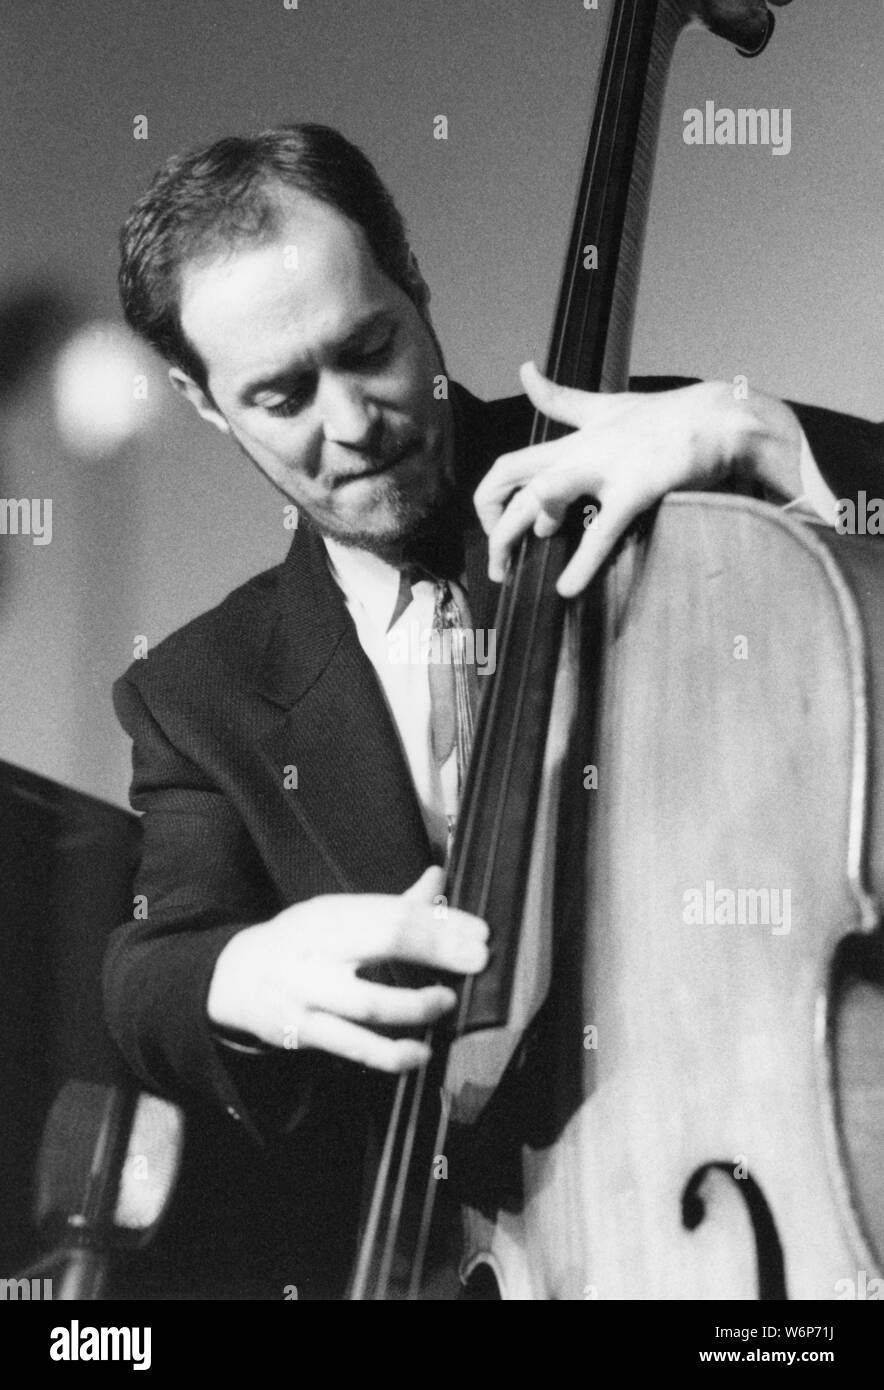 Phil Flanigan, playing double bass, c2006. Stock Photo